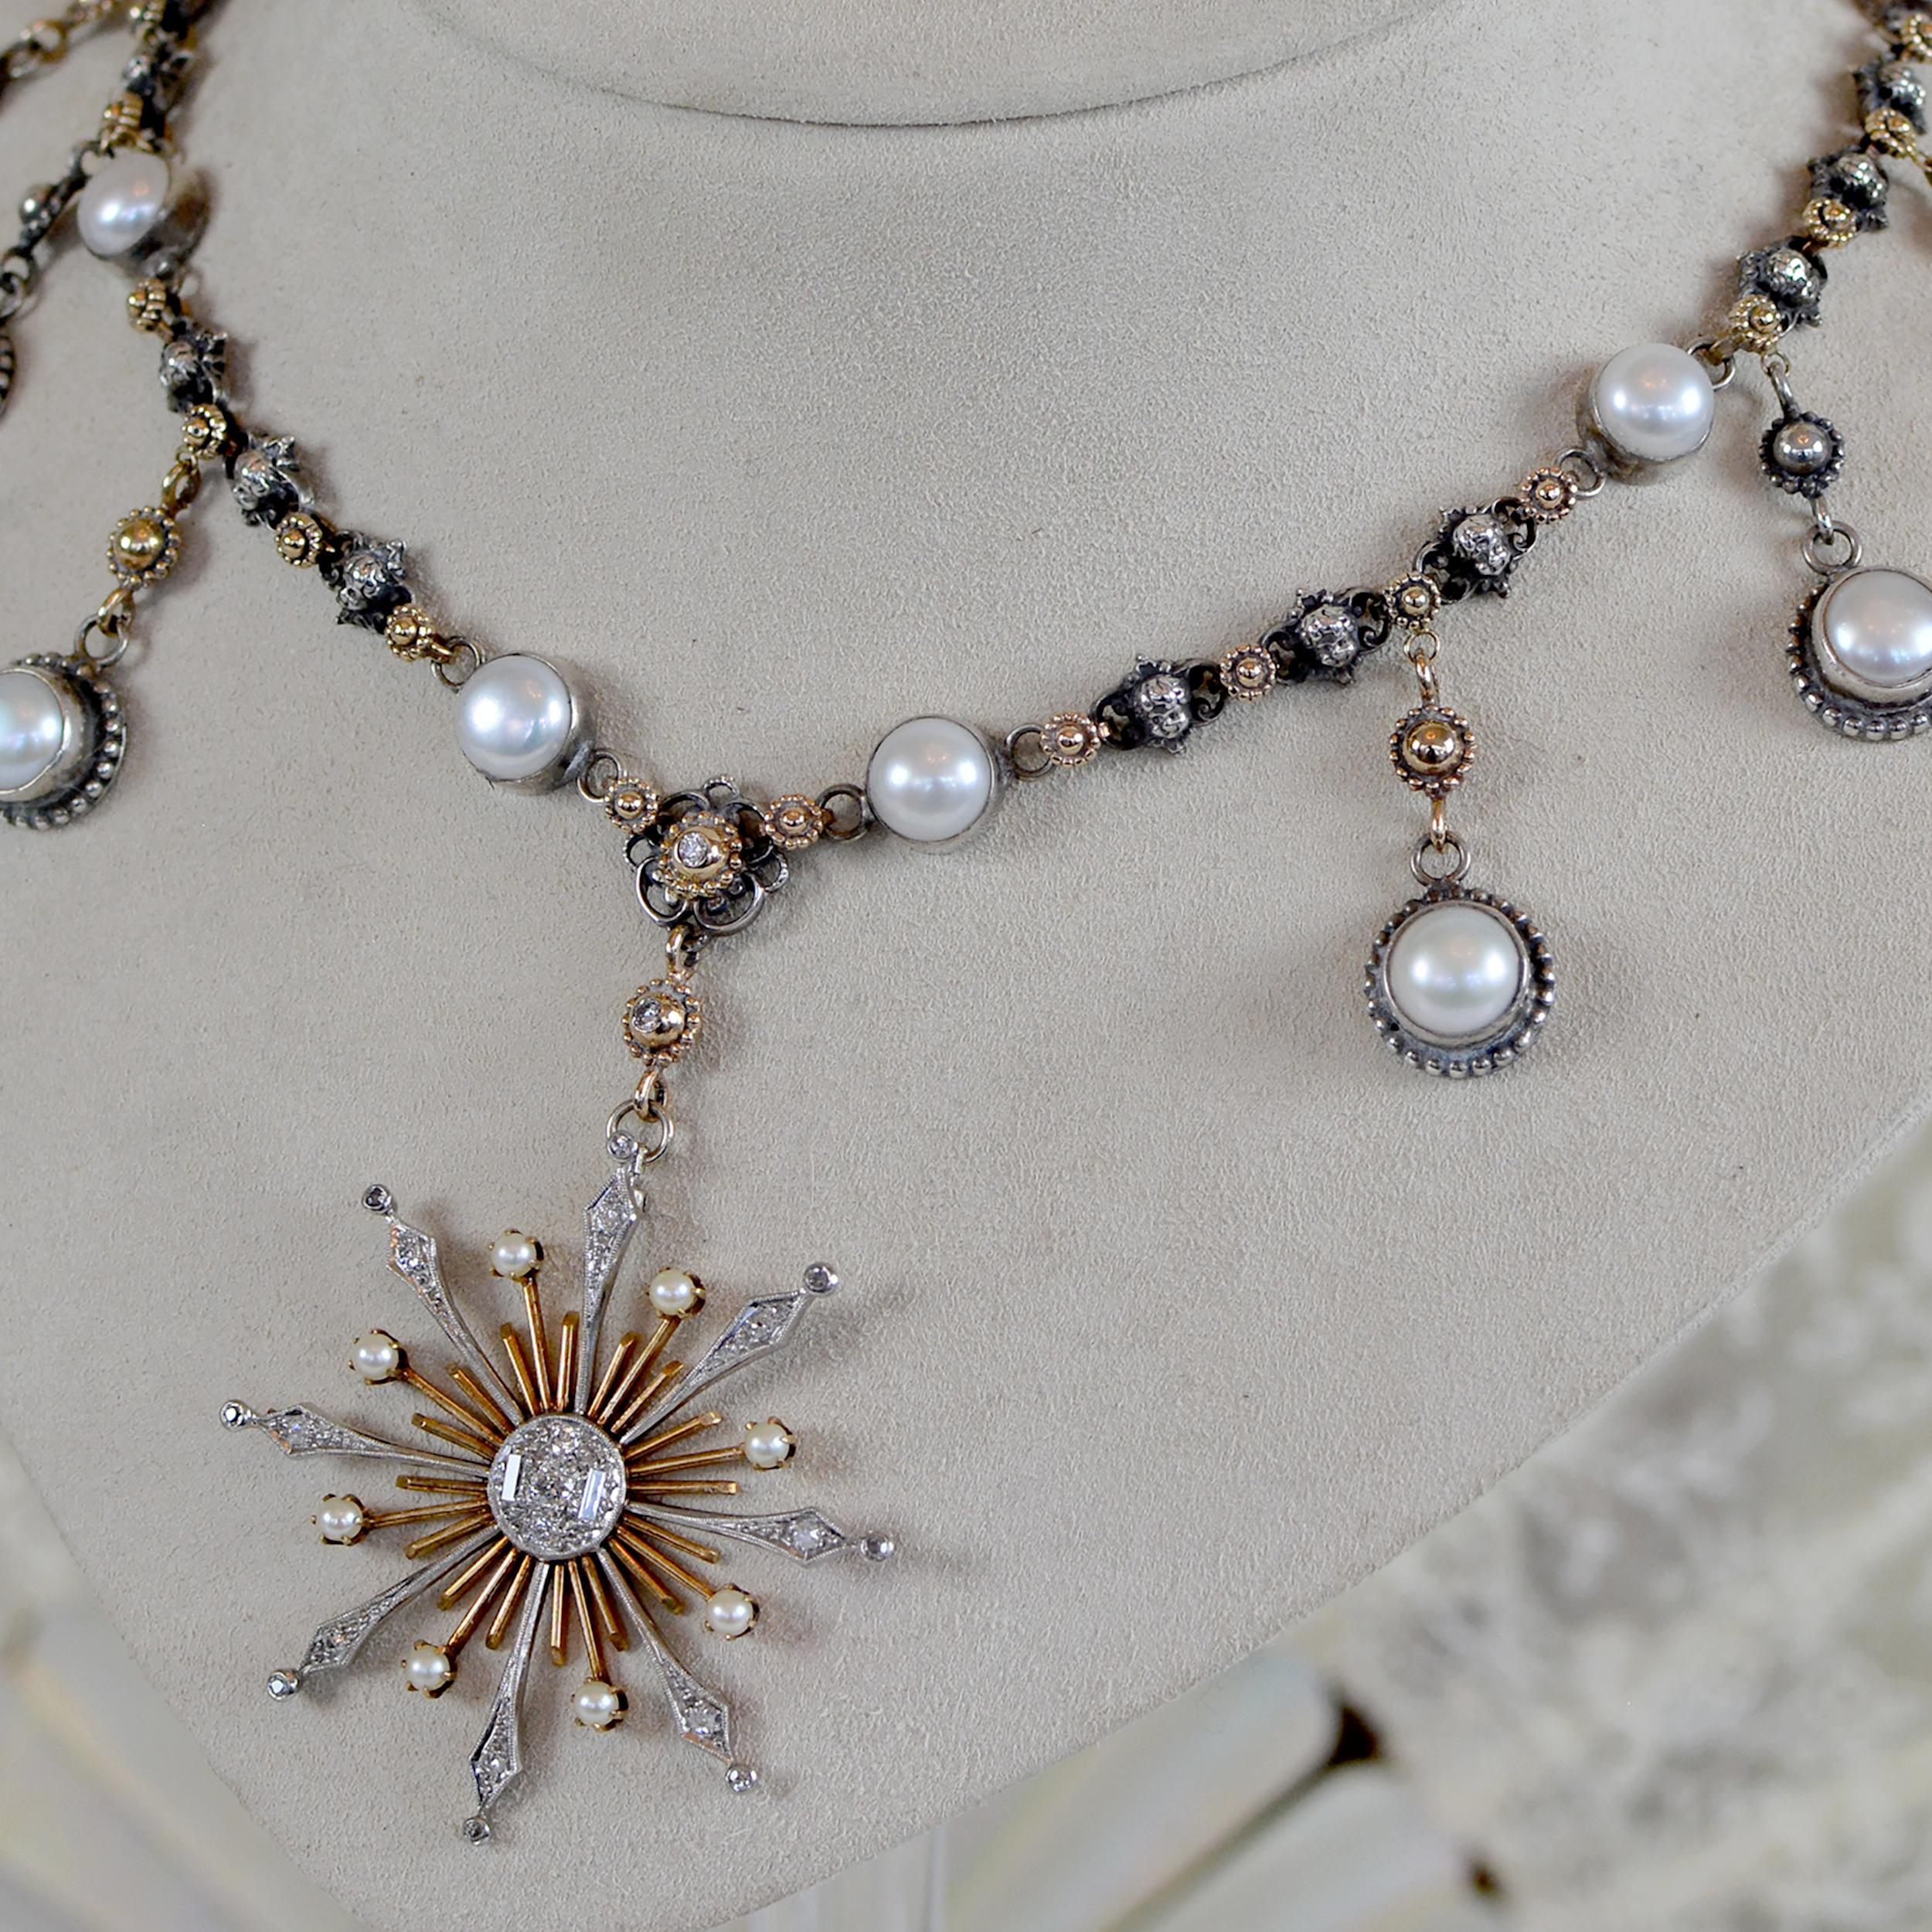 Jill Garber Diamond and Pearl Starburst Drop Necklace - 14 kt. Gold and Silver For Sale 2